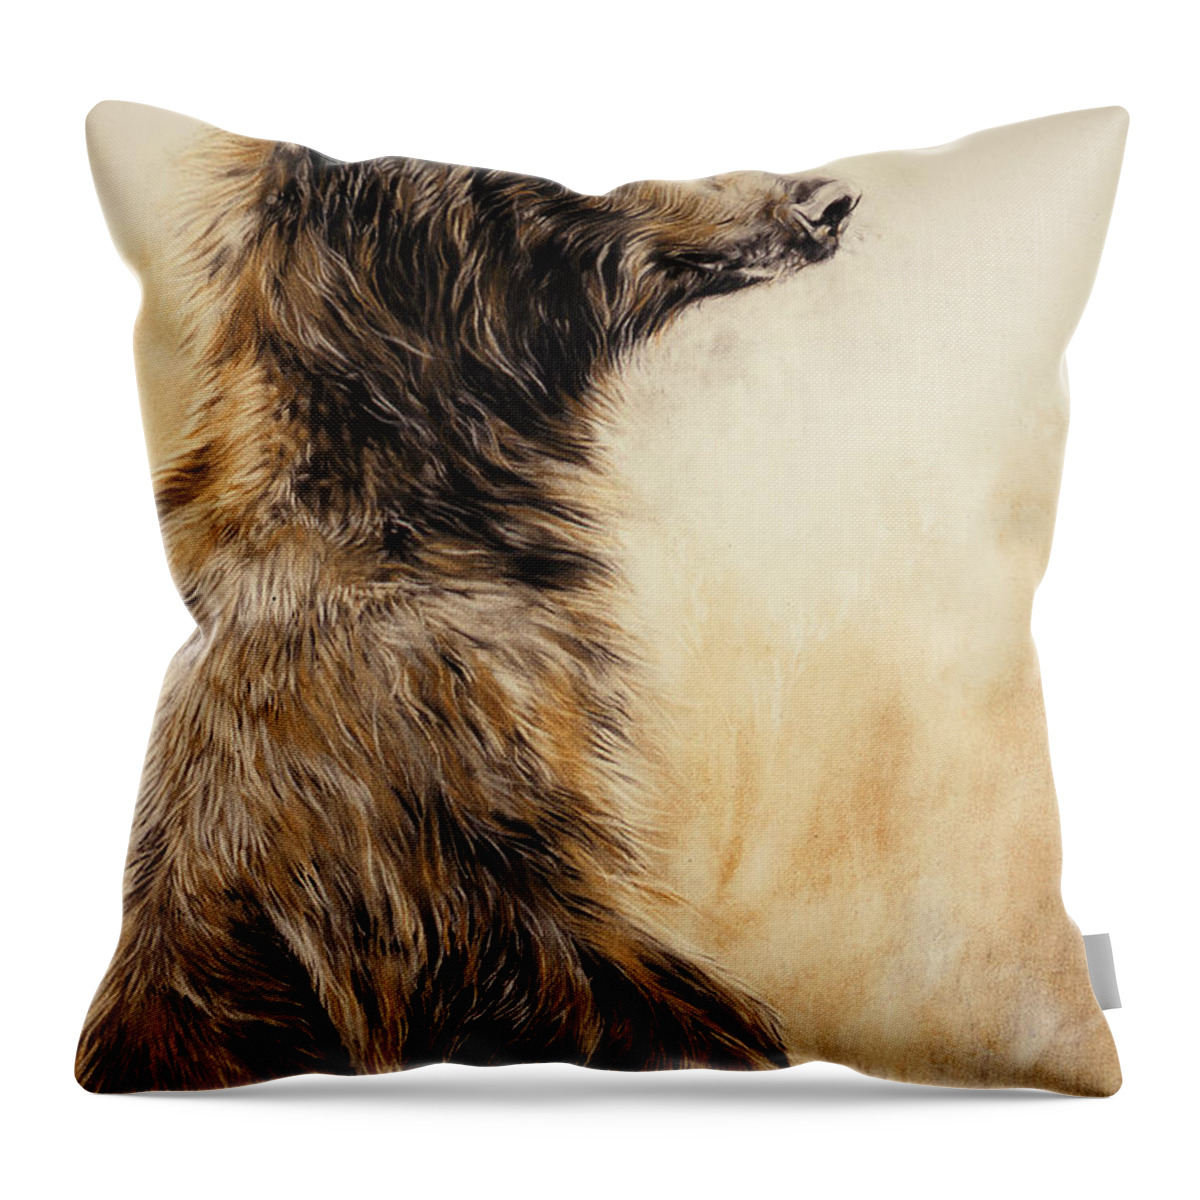 Wild; Animal; Brown; Fur; Standing; Fur; Snout; Hind Legs; Grizzly; Bear Throw Pillow featuring the painting Grizzly Bear 2 by Odile Kidd